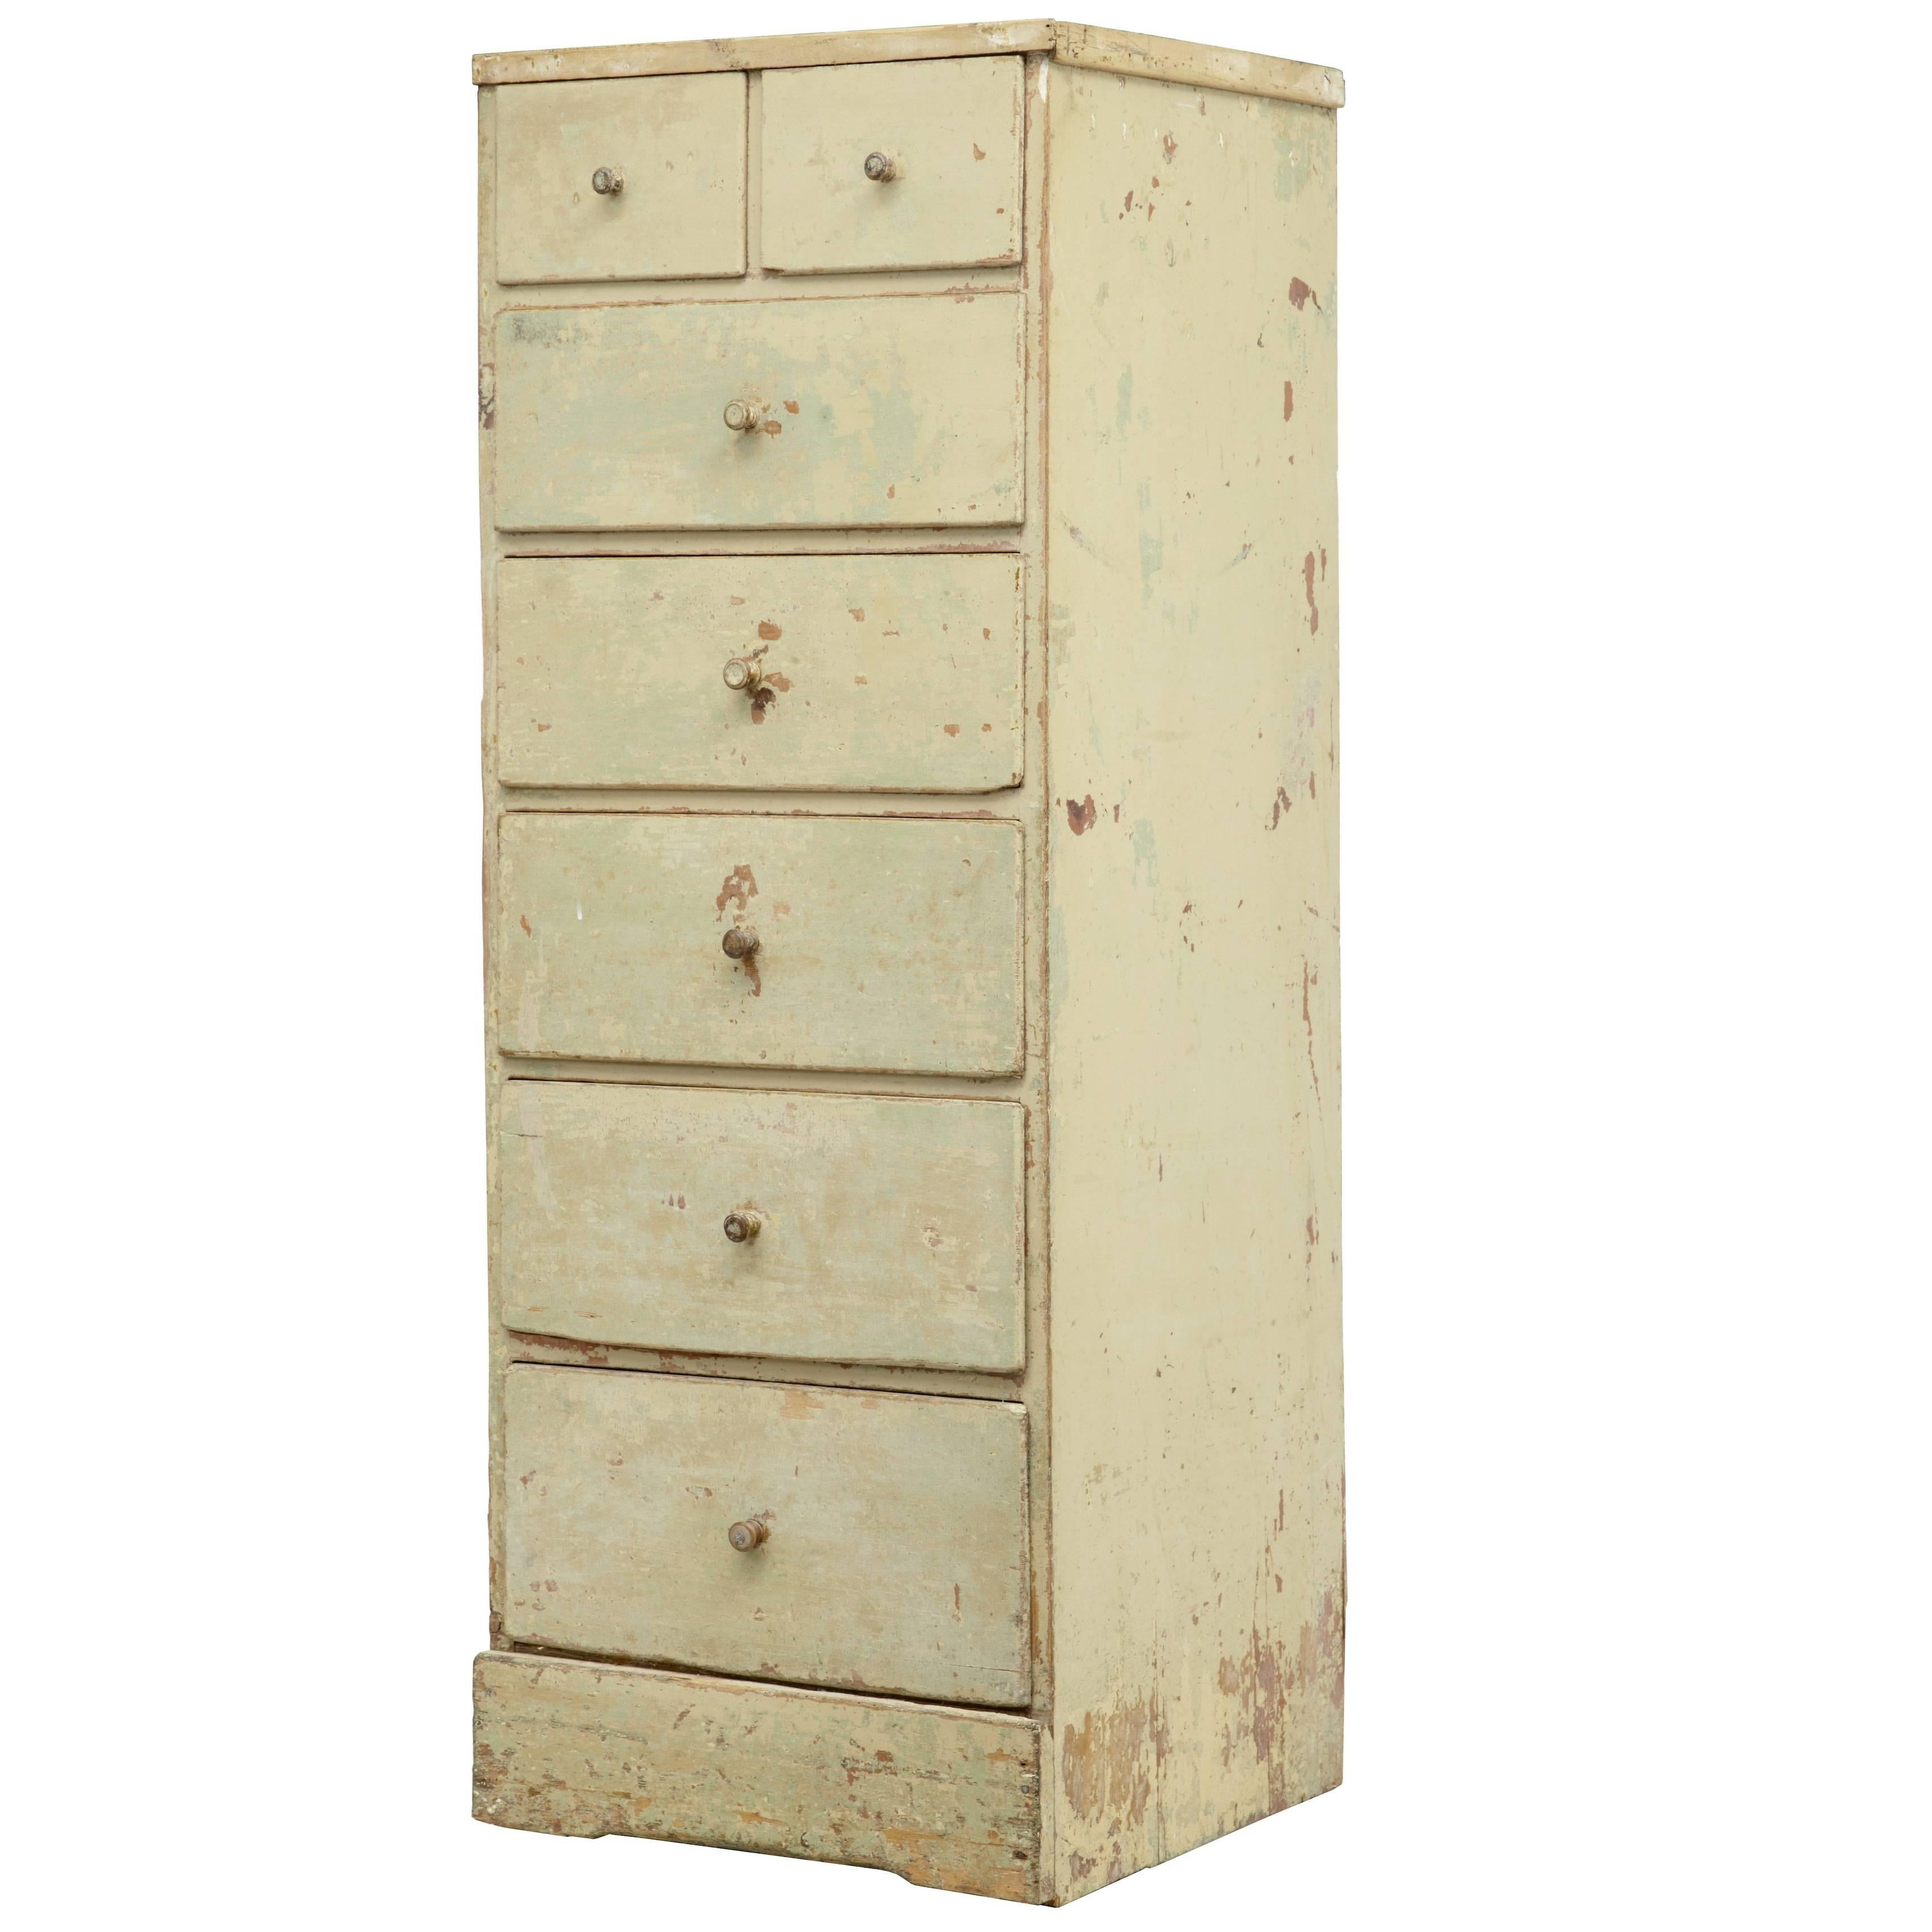 19th Century Painted Swedish Tallboy Chest of Drawers